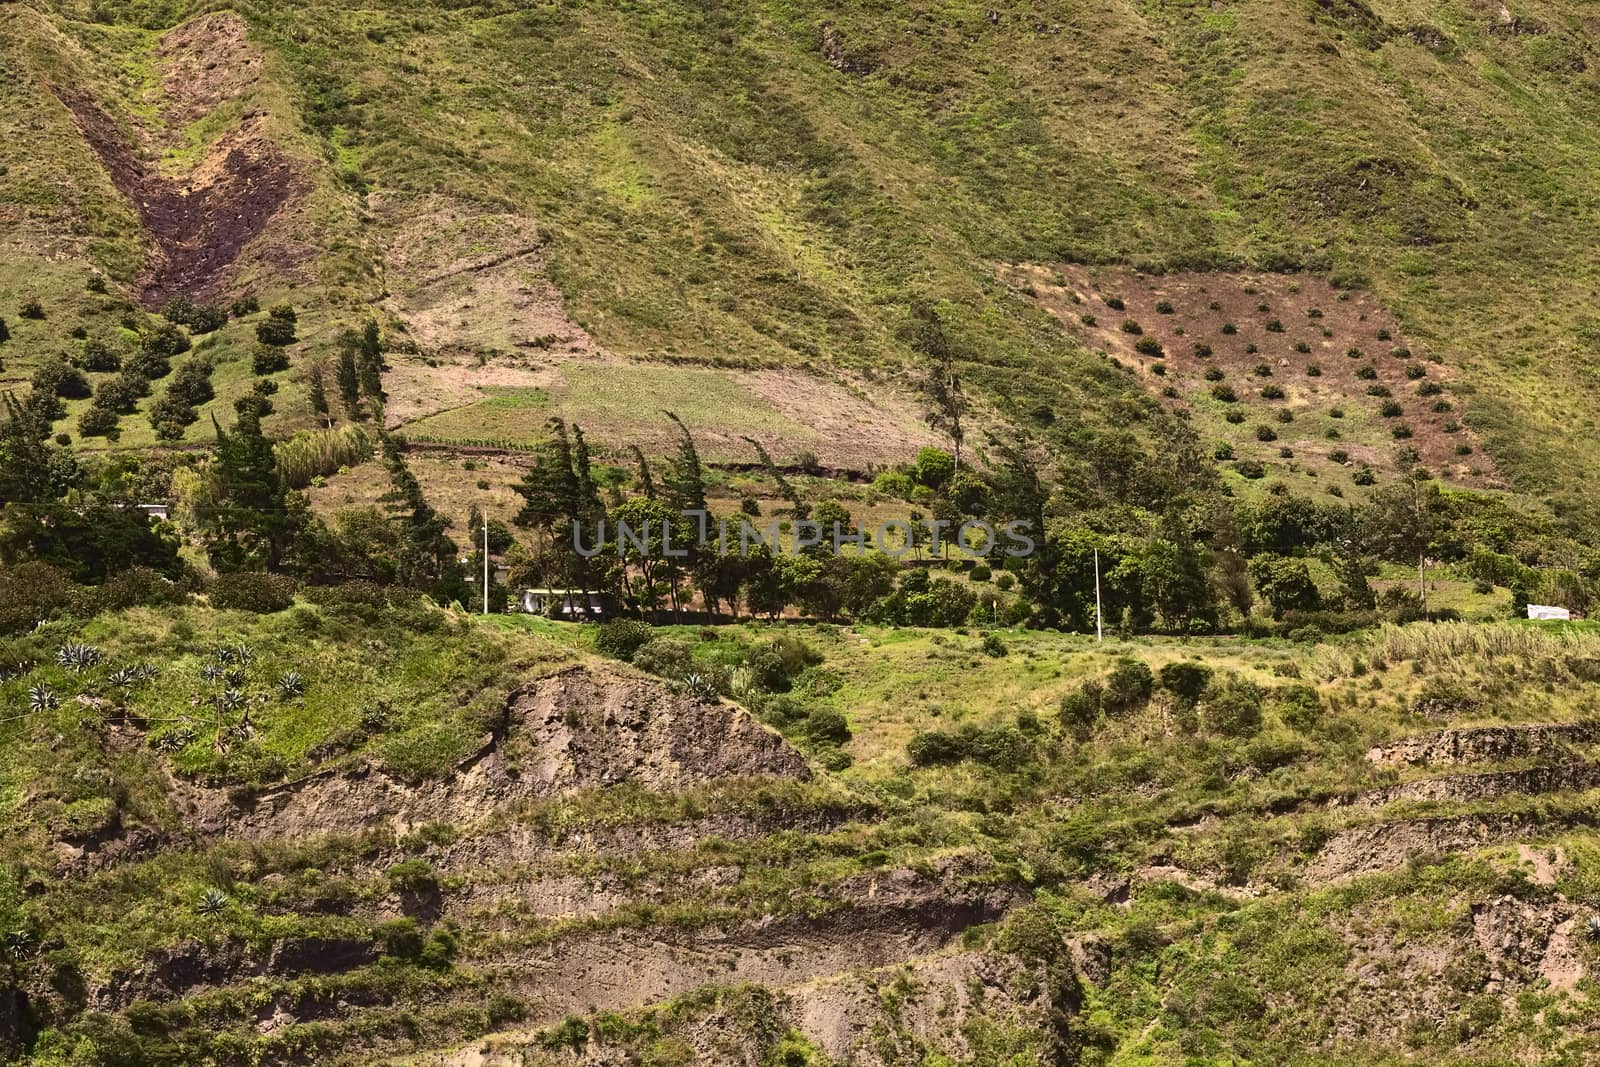 Rural hillside landscape with buildings, scrubs and trees along the road between Ambato and Banos in Tungurahua Province in Central Ecuador